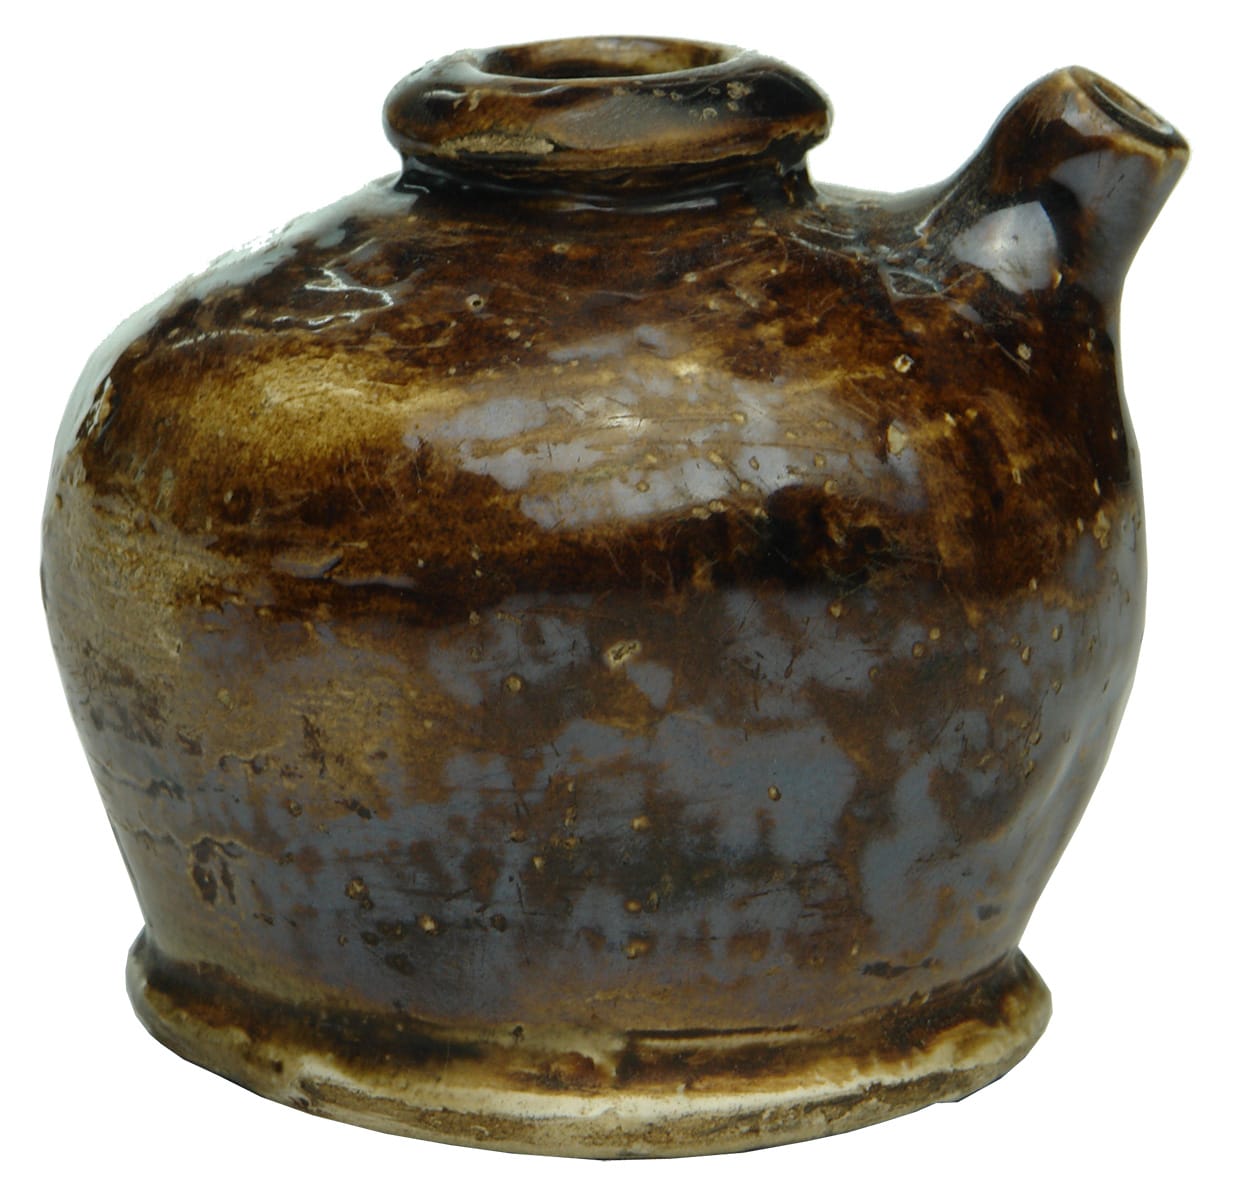 Miniature Chinese Soy Sauce Ceramic Pottery